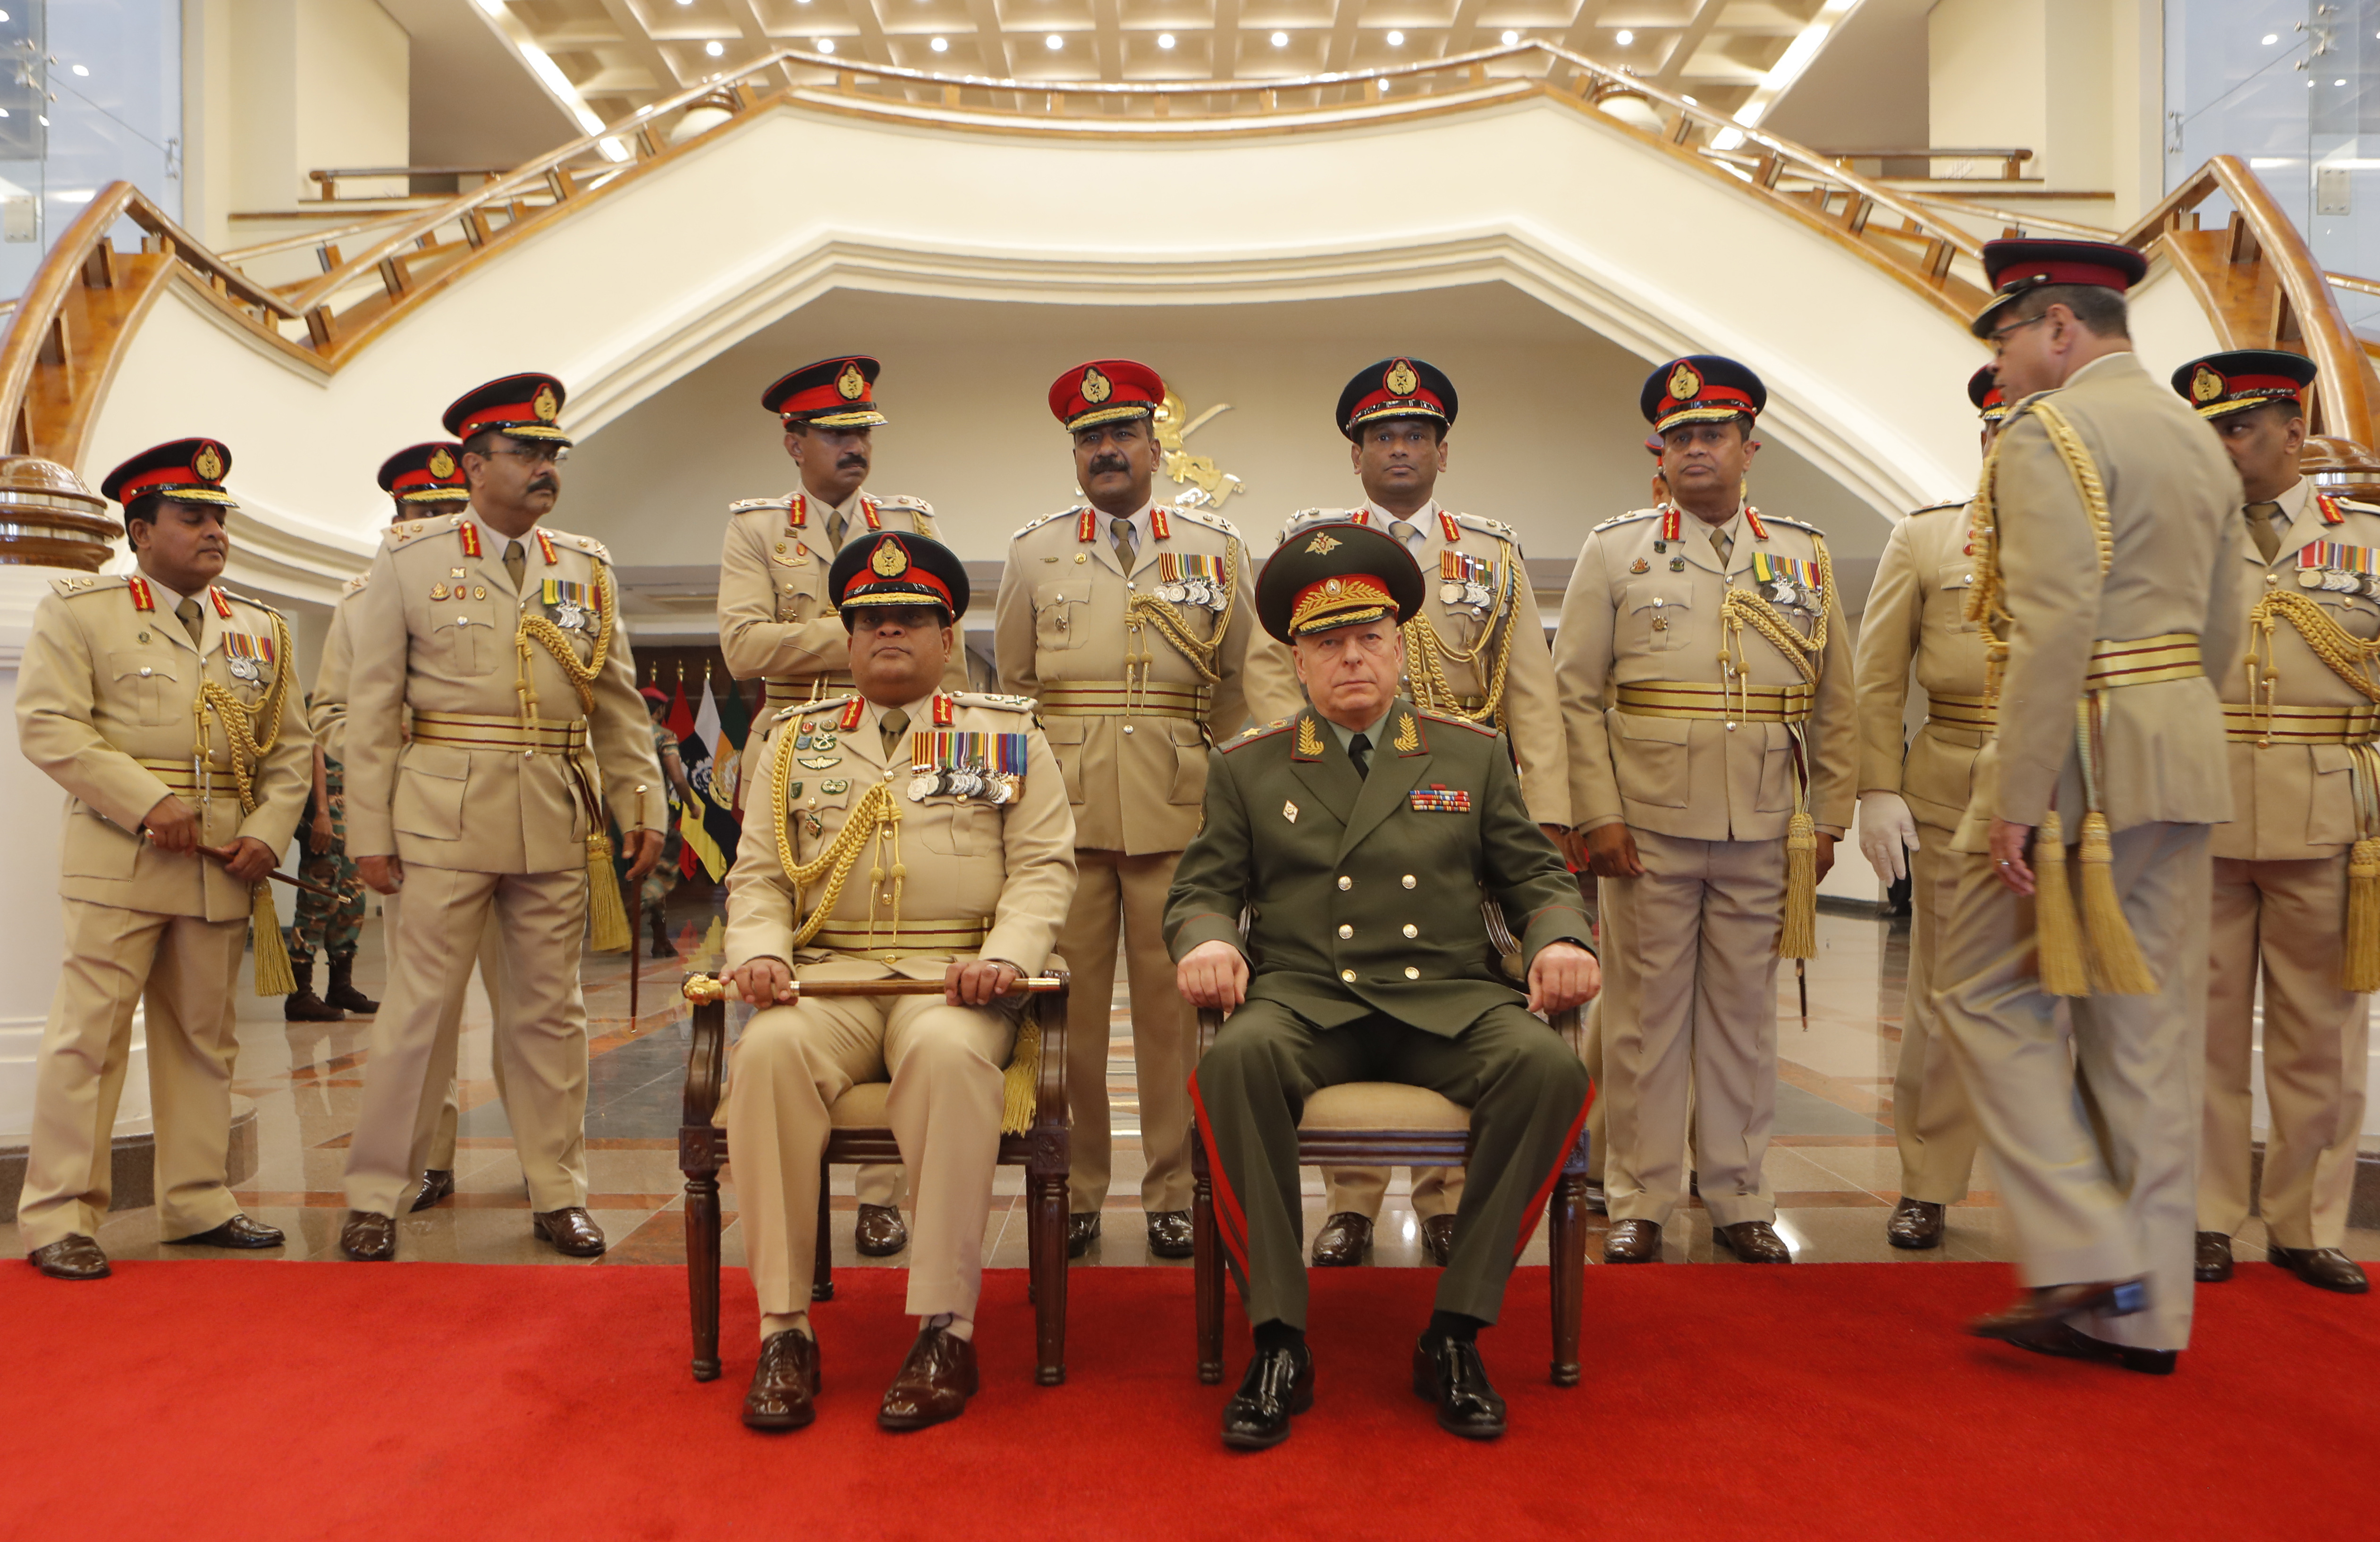 Sri Lankan army commander Lt. Gen. Shavendra Silva, seated left, along with his top command officers prepare to pose for a photograph with Russian Commander-in-Chief of the Ground Forces Colonel-General Oleg Salyukov at the military head quarters in Colombo, Sri Lanka on Monday